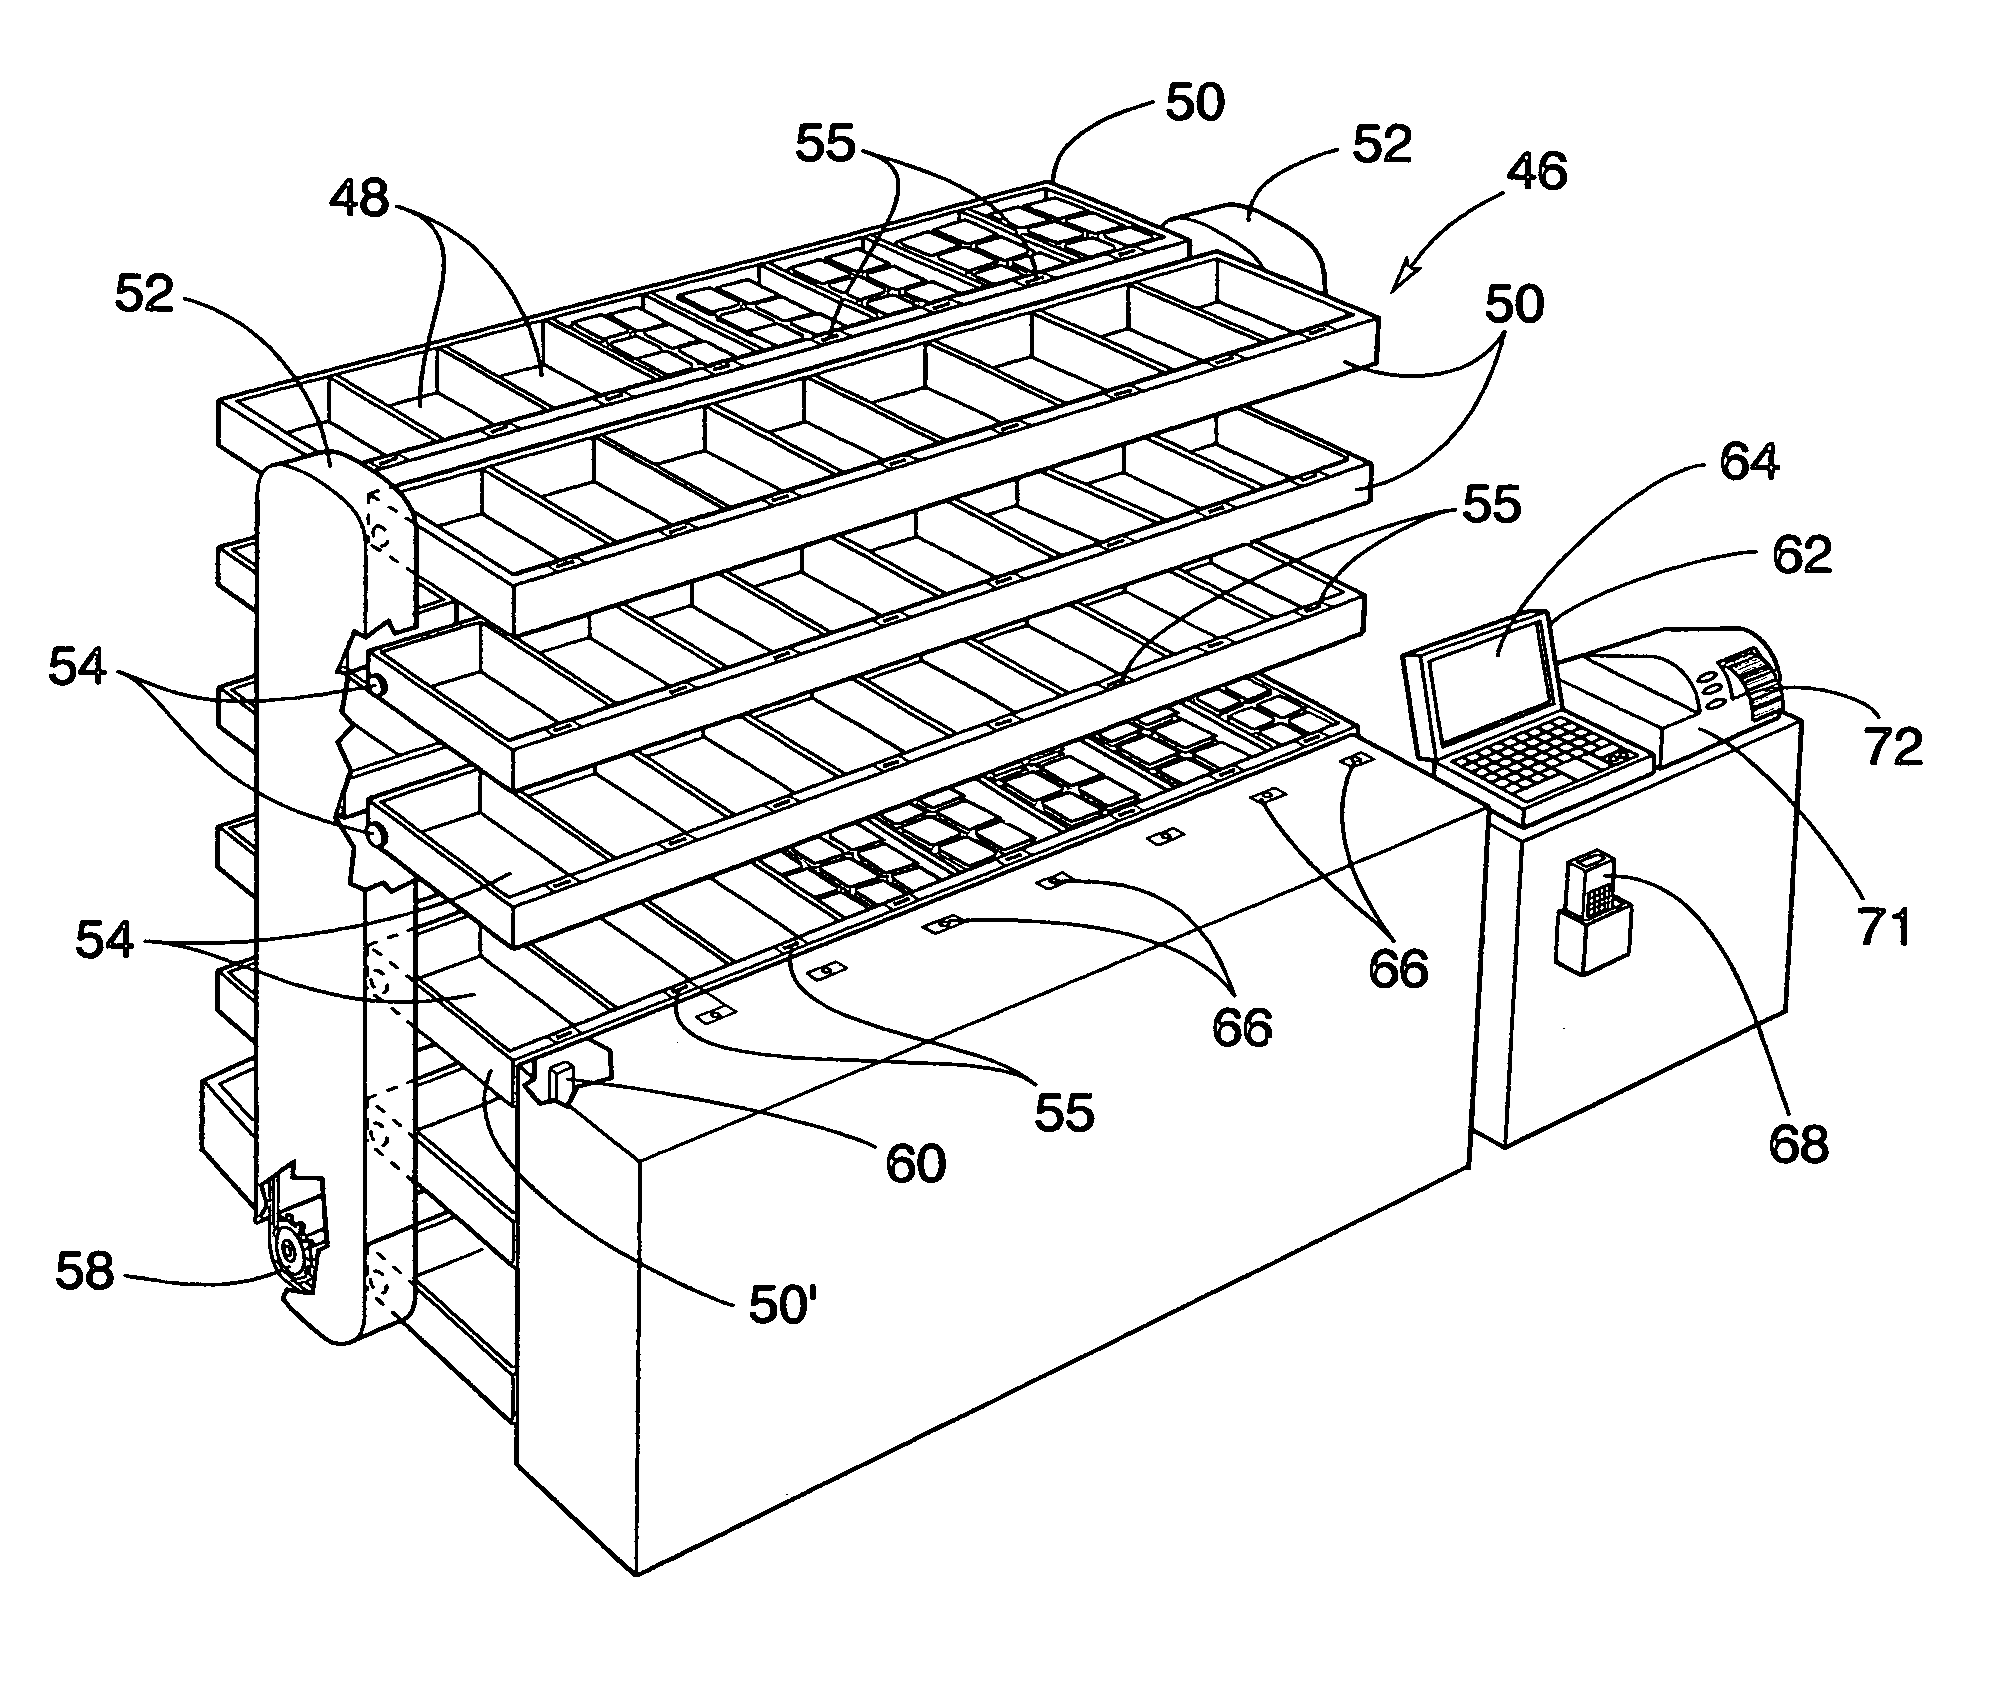 Restocking system using a carousel